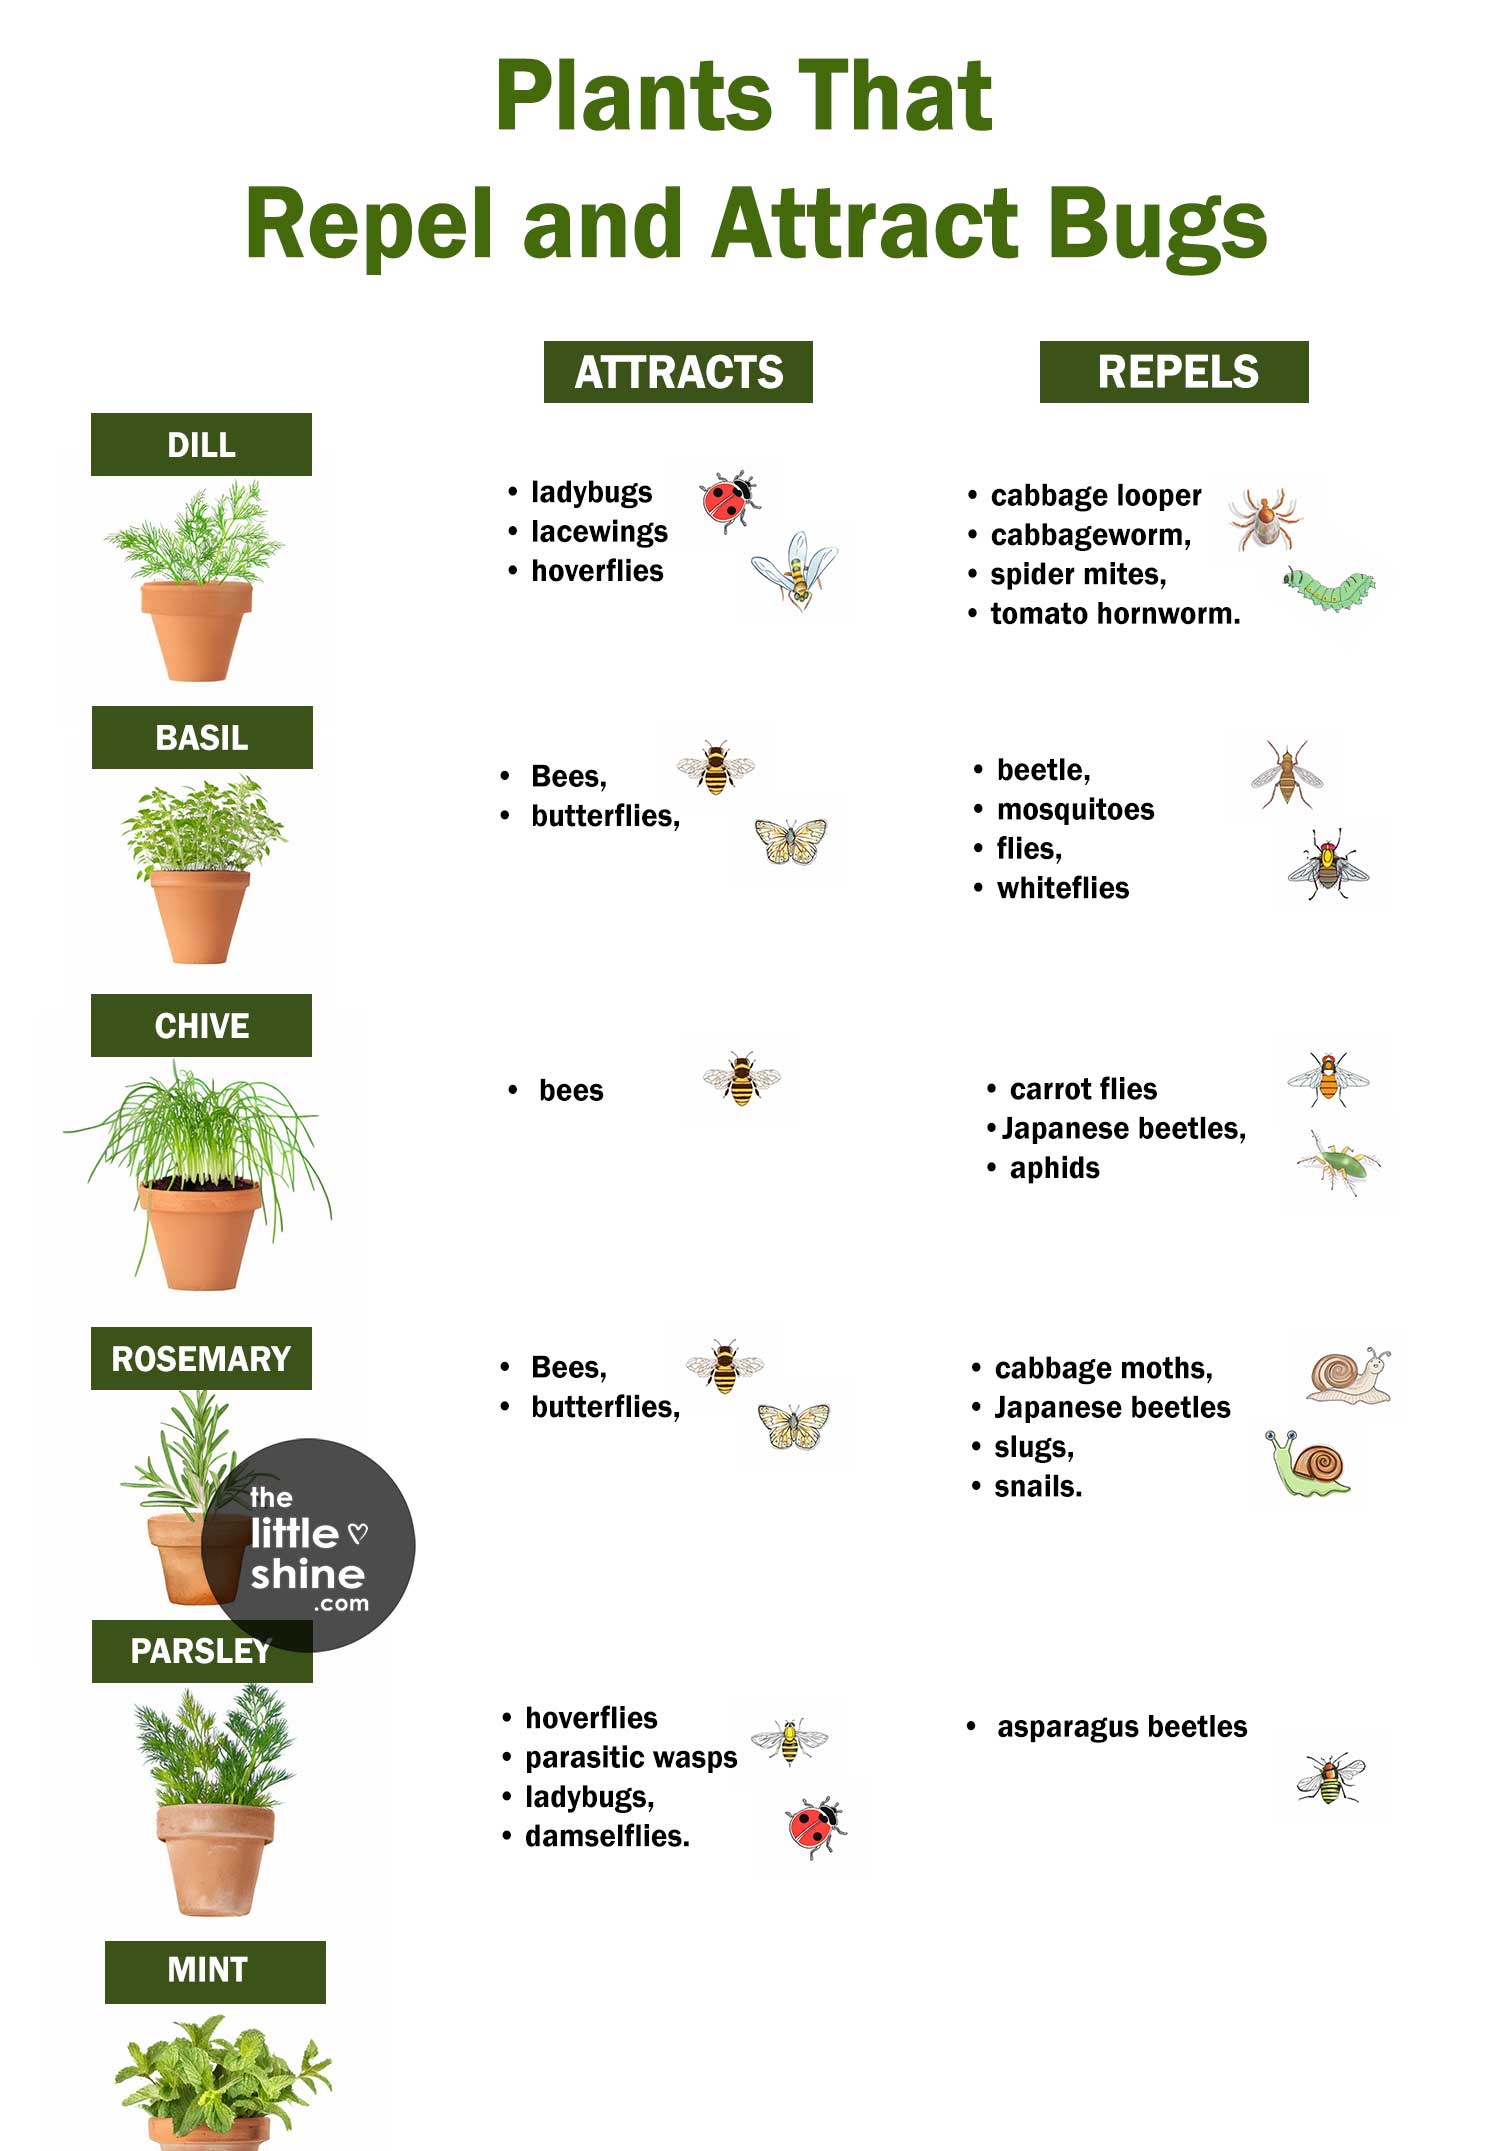 Herbs That Attract and Repel Bugs